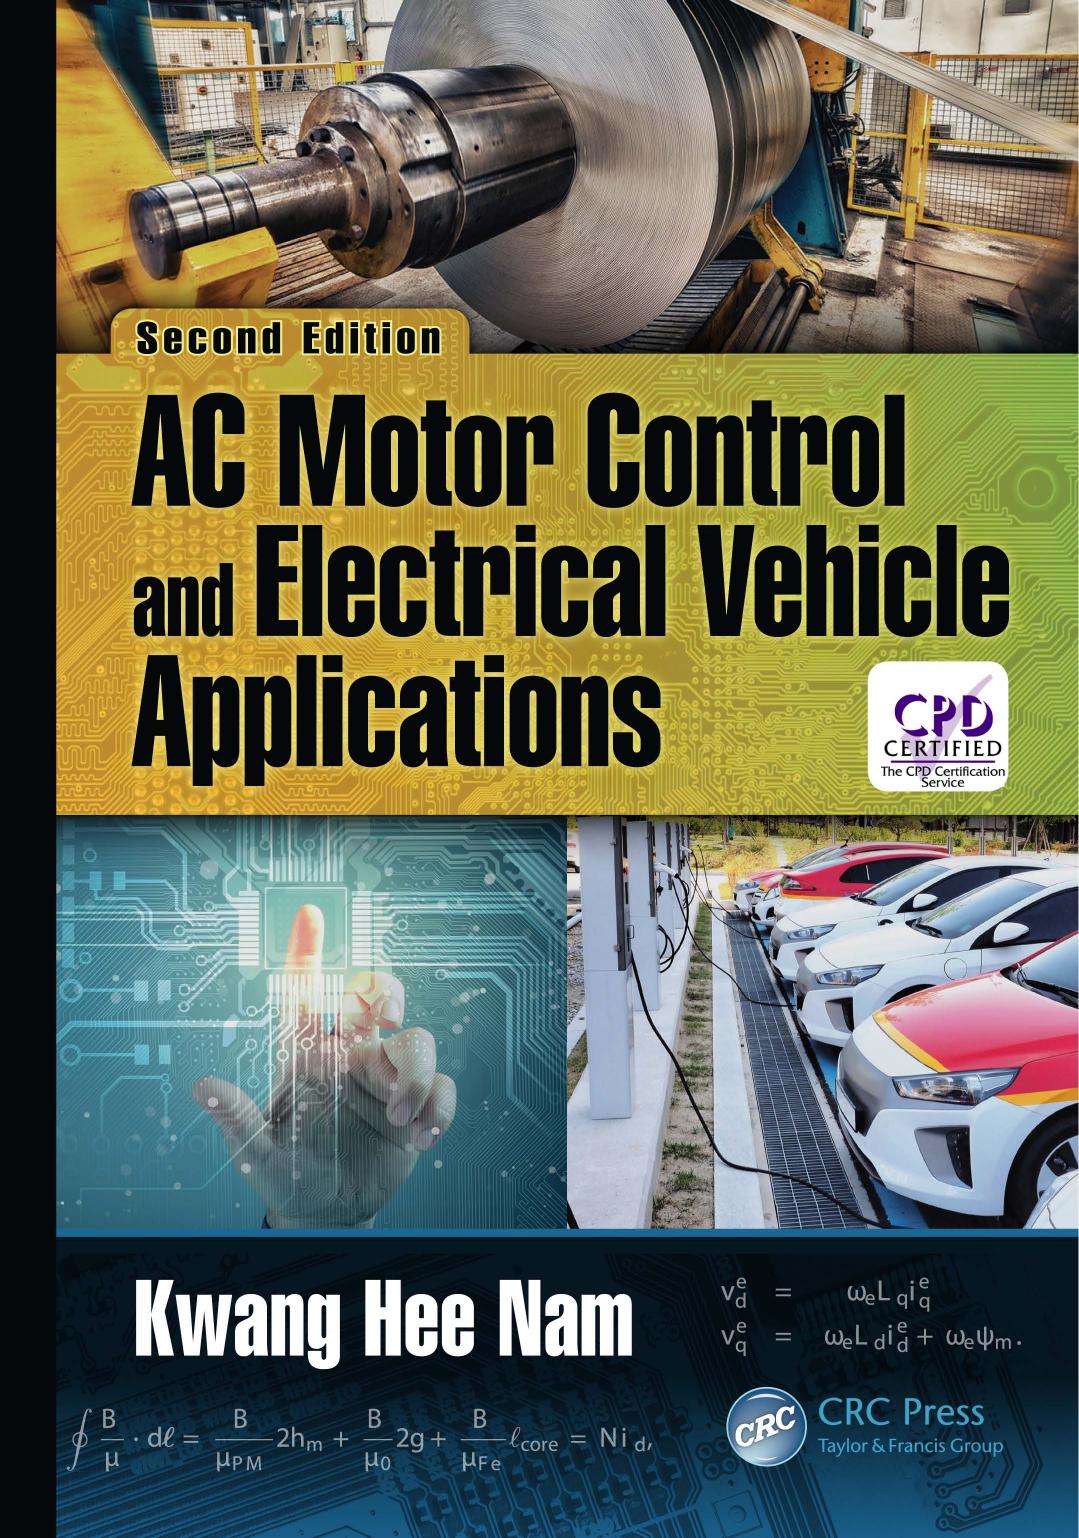 AC Motor Control and Electrical Vehicle Applications 2nd Edition by Kwang Hee Nam